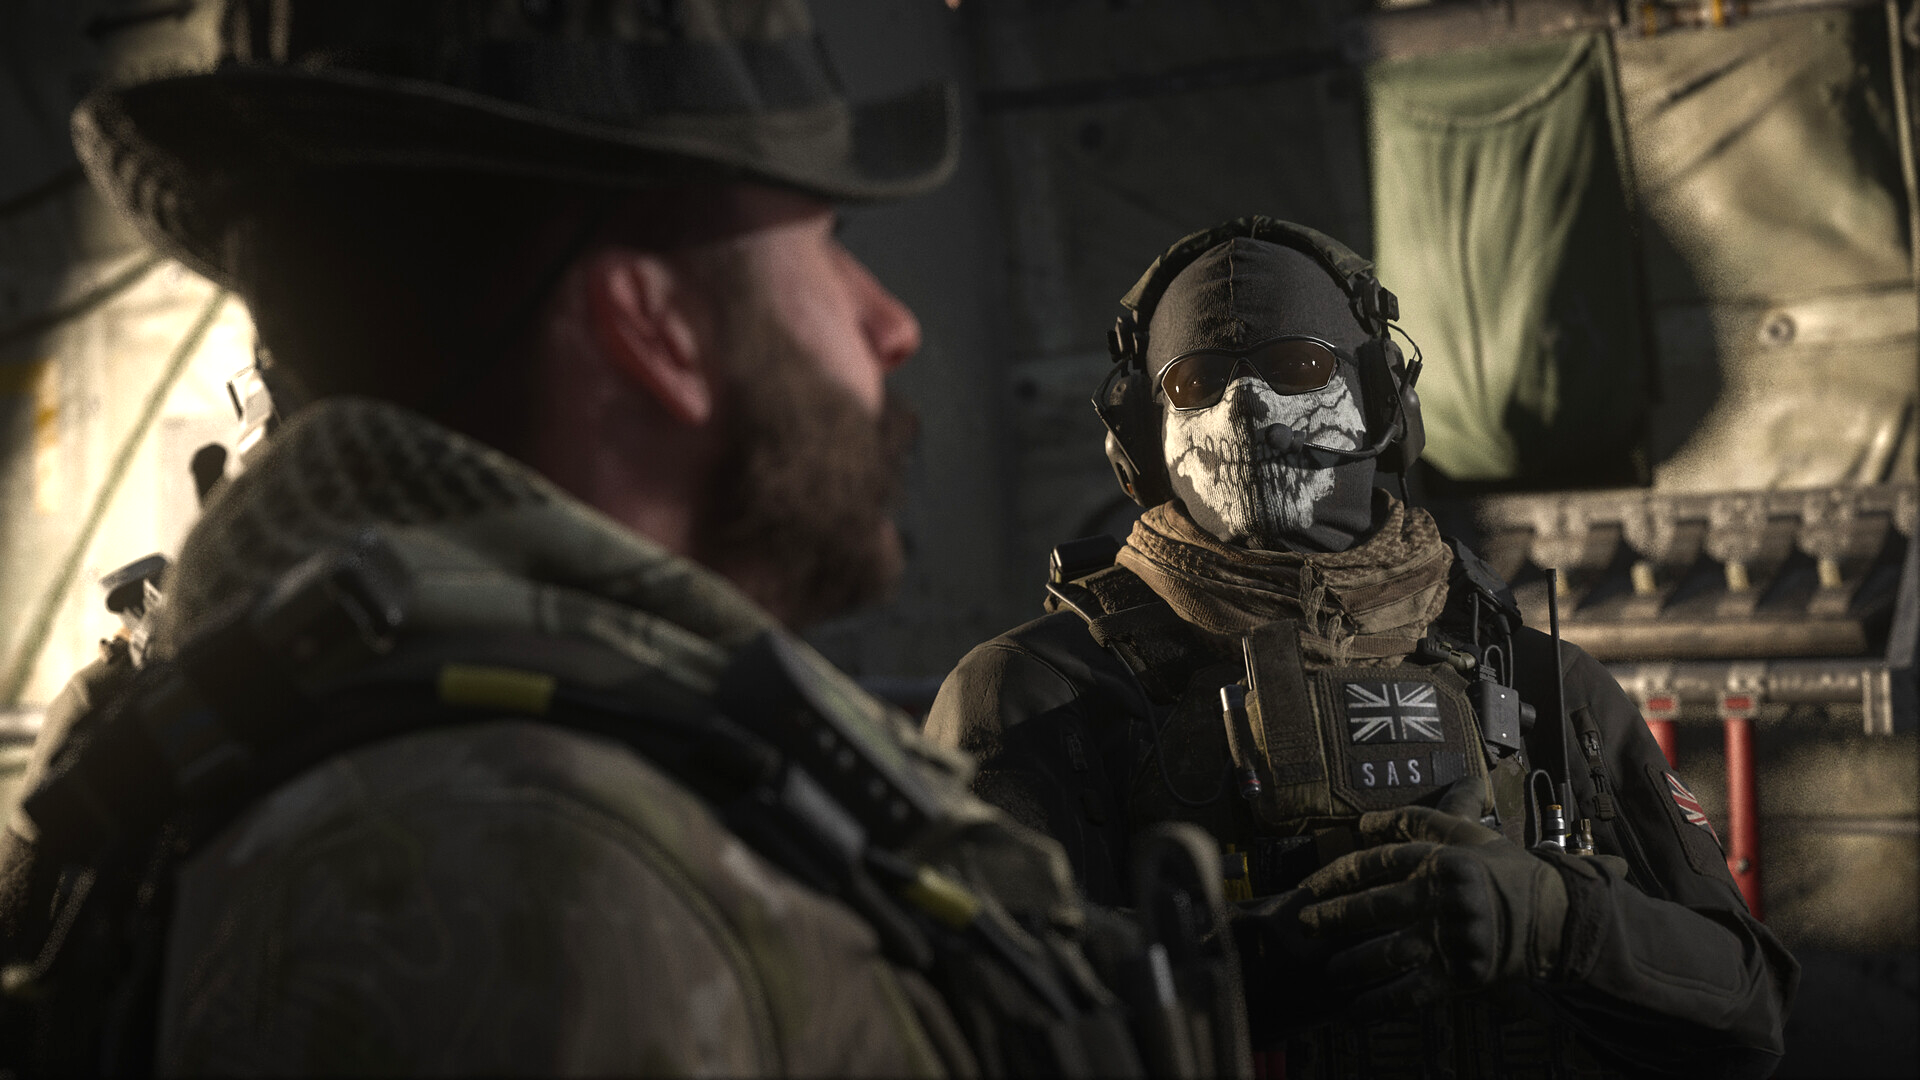 Amid fan backlash, Modern Warfare 3 studio bluntly denies reports the campaign was scraped together in 16 months as ‘simply not true’